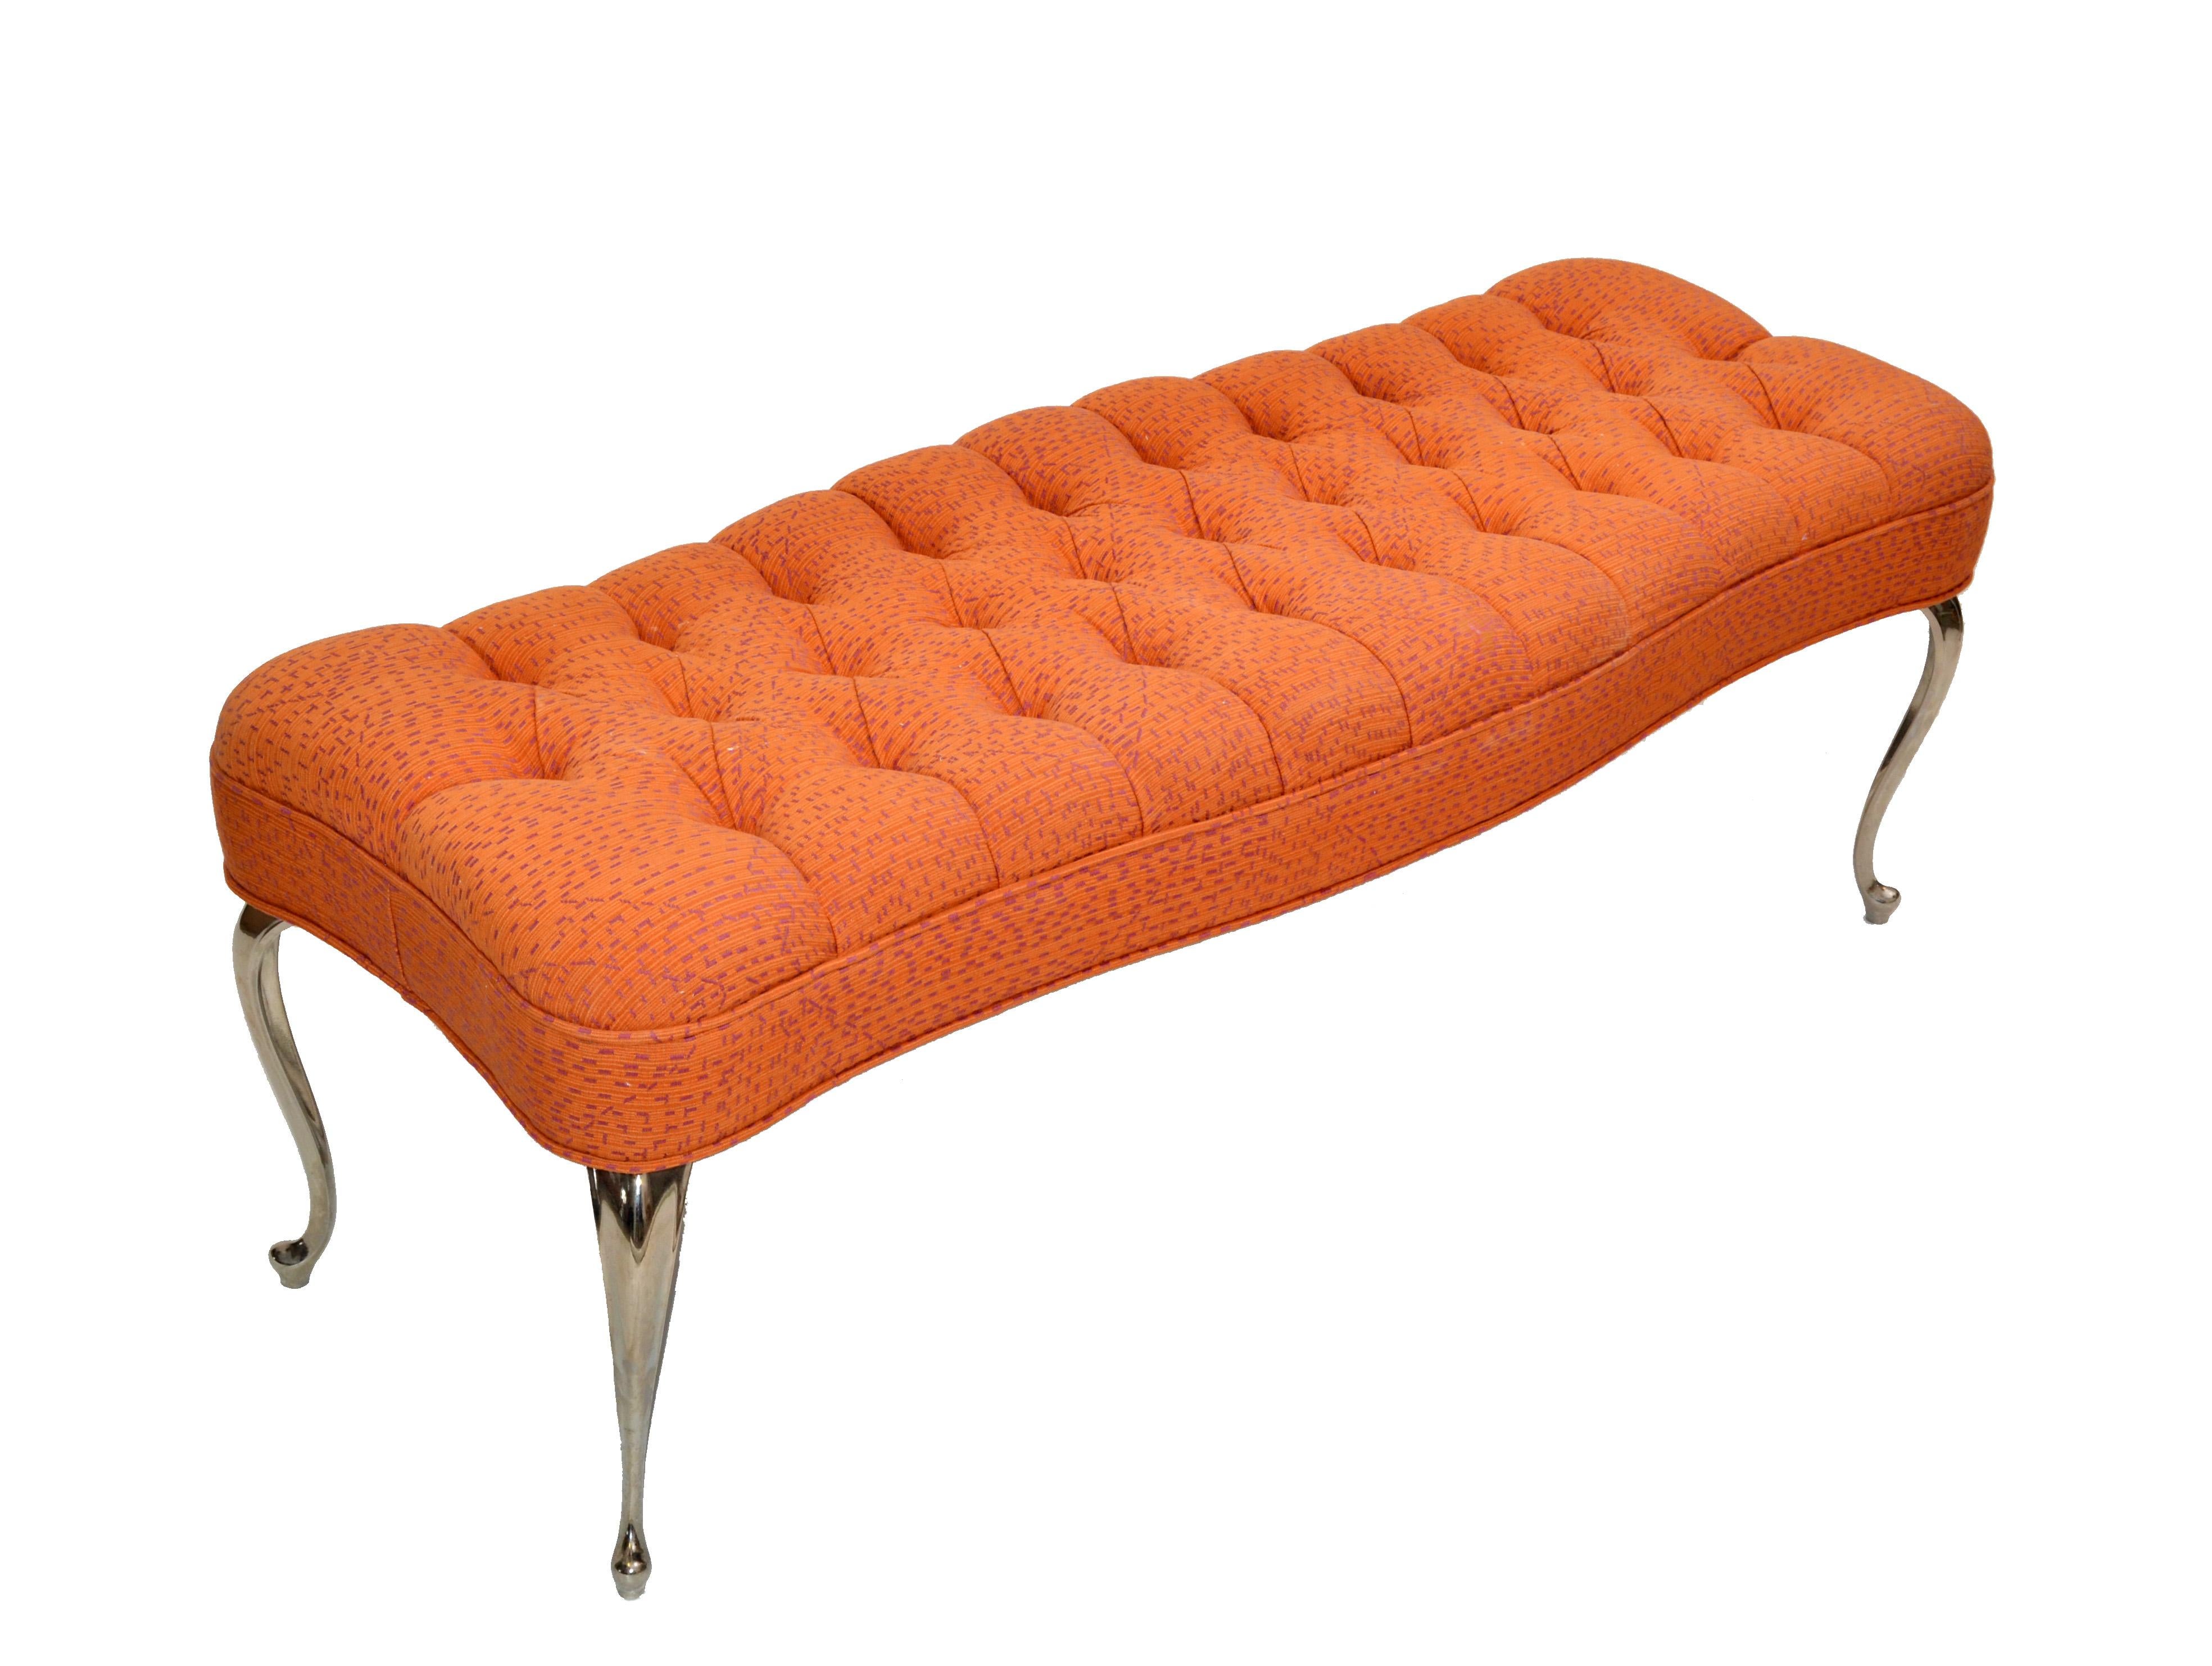 Italian Hollywood Regency Mastercraft style bench in orange / purple tufted fabric tapered with polished stainless-steel legs.
Great addition for the Master Bedroom in front of the Kingsize Bed.
This bench is ready for a new home.
  